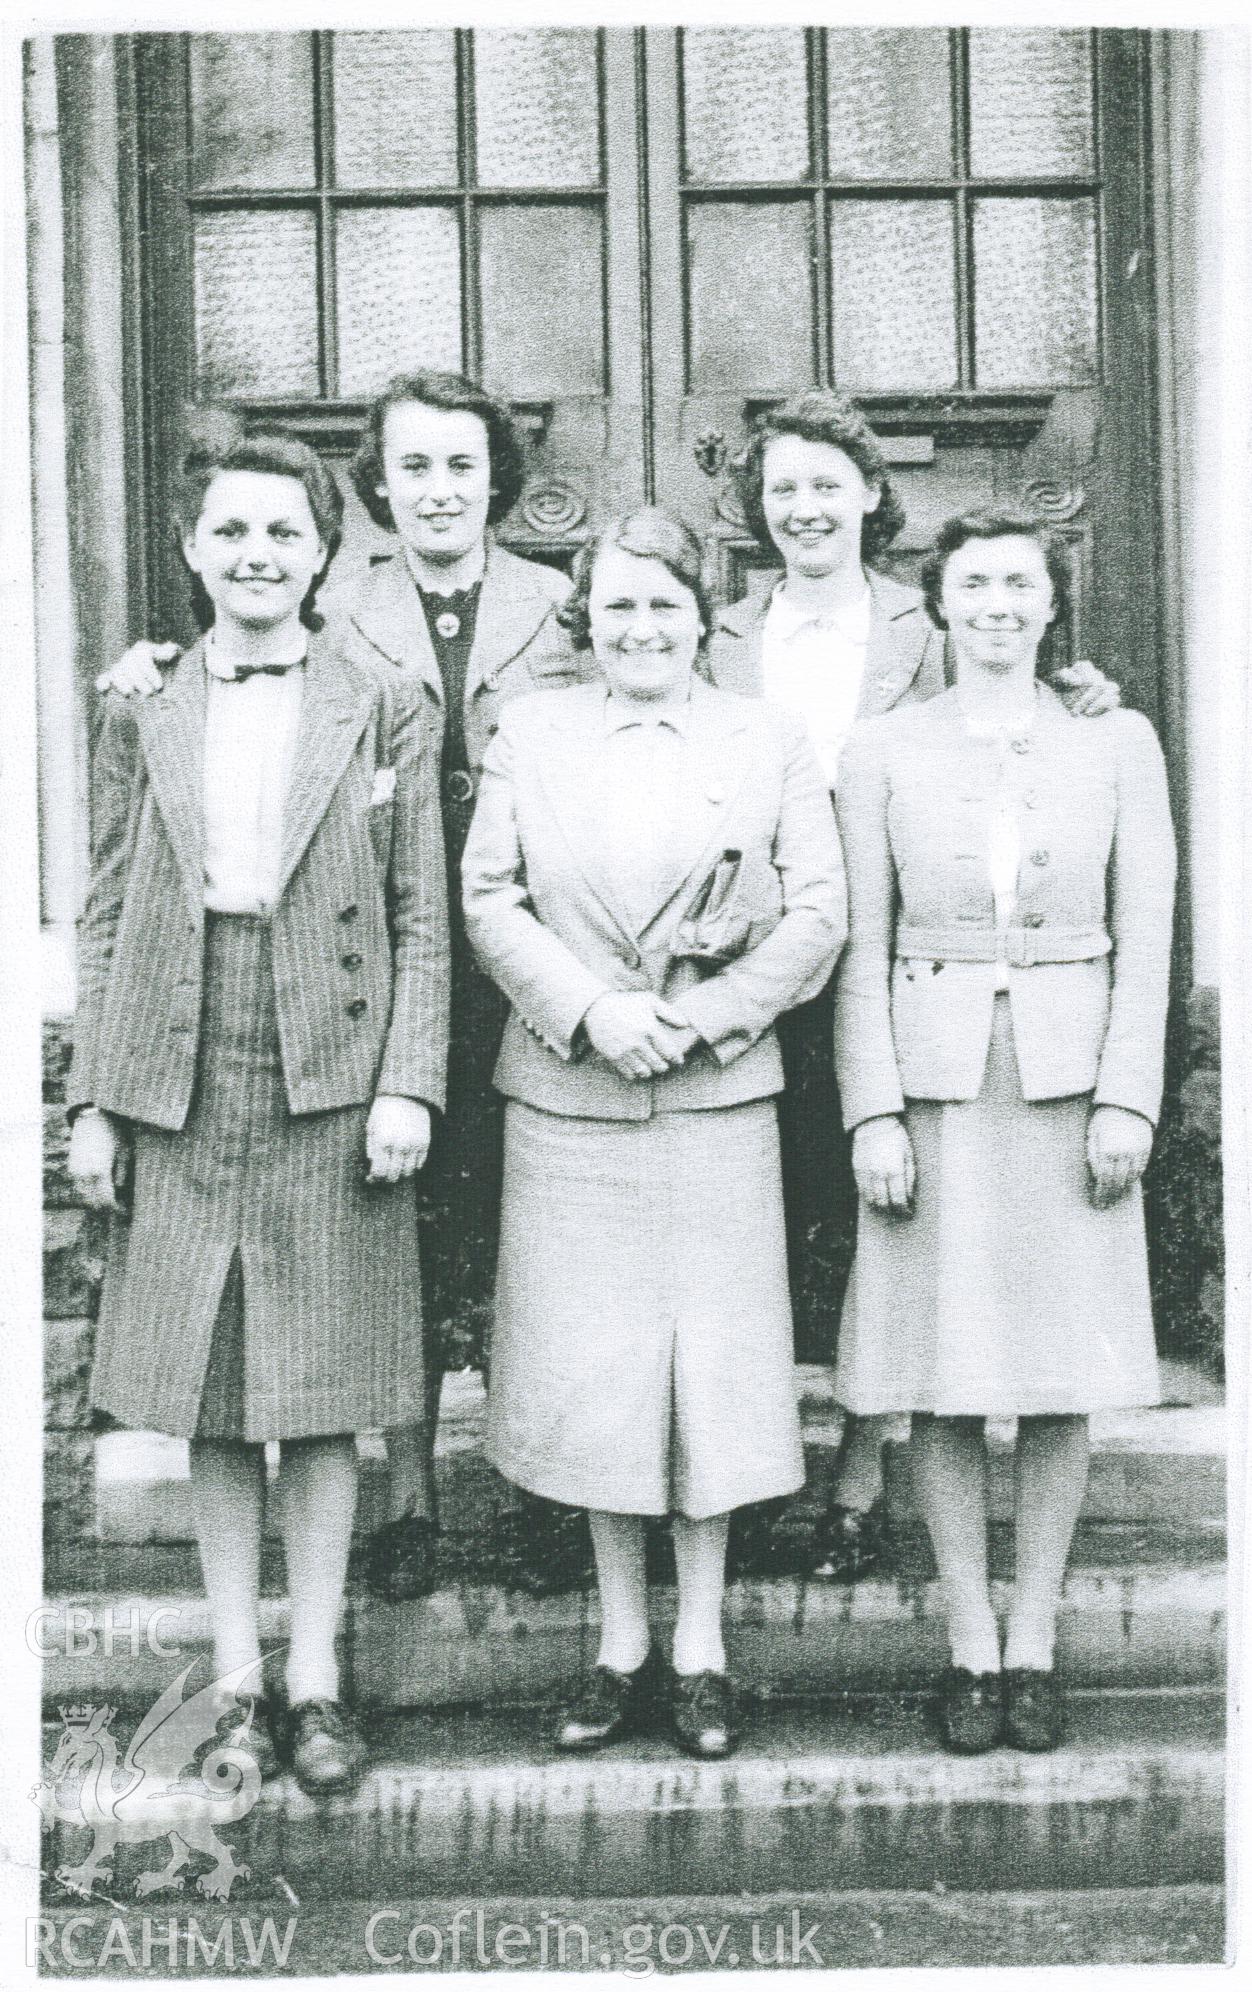 Black and white photograph of four girls from Bethania Sunday School with Sunday School teacher Mrs Mini Treharne, circa 1940s. Donated to the RCAHMW by Cyril Philips as part of the Digital Dissent Project.